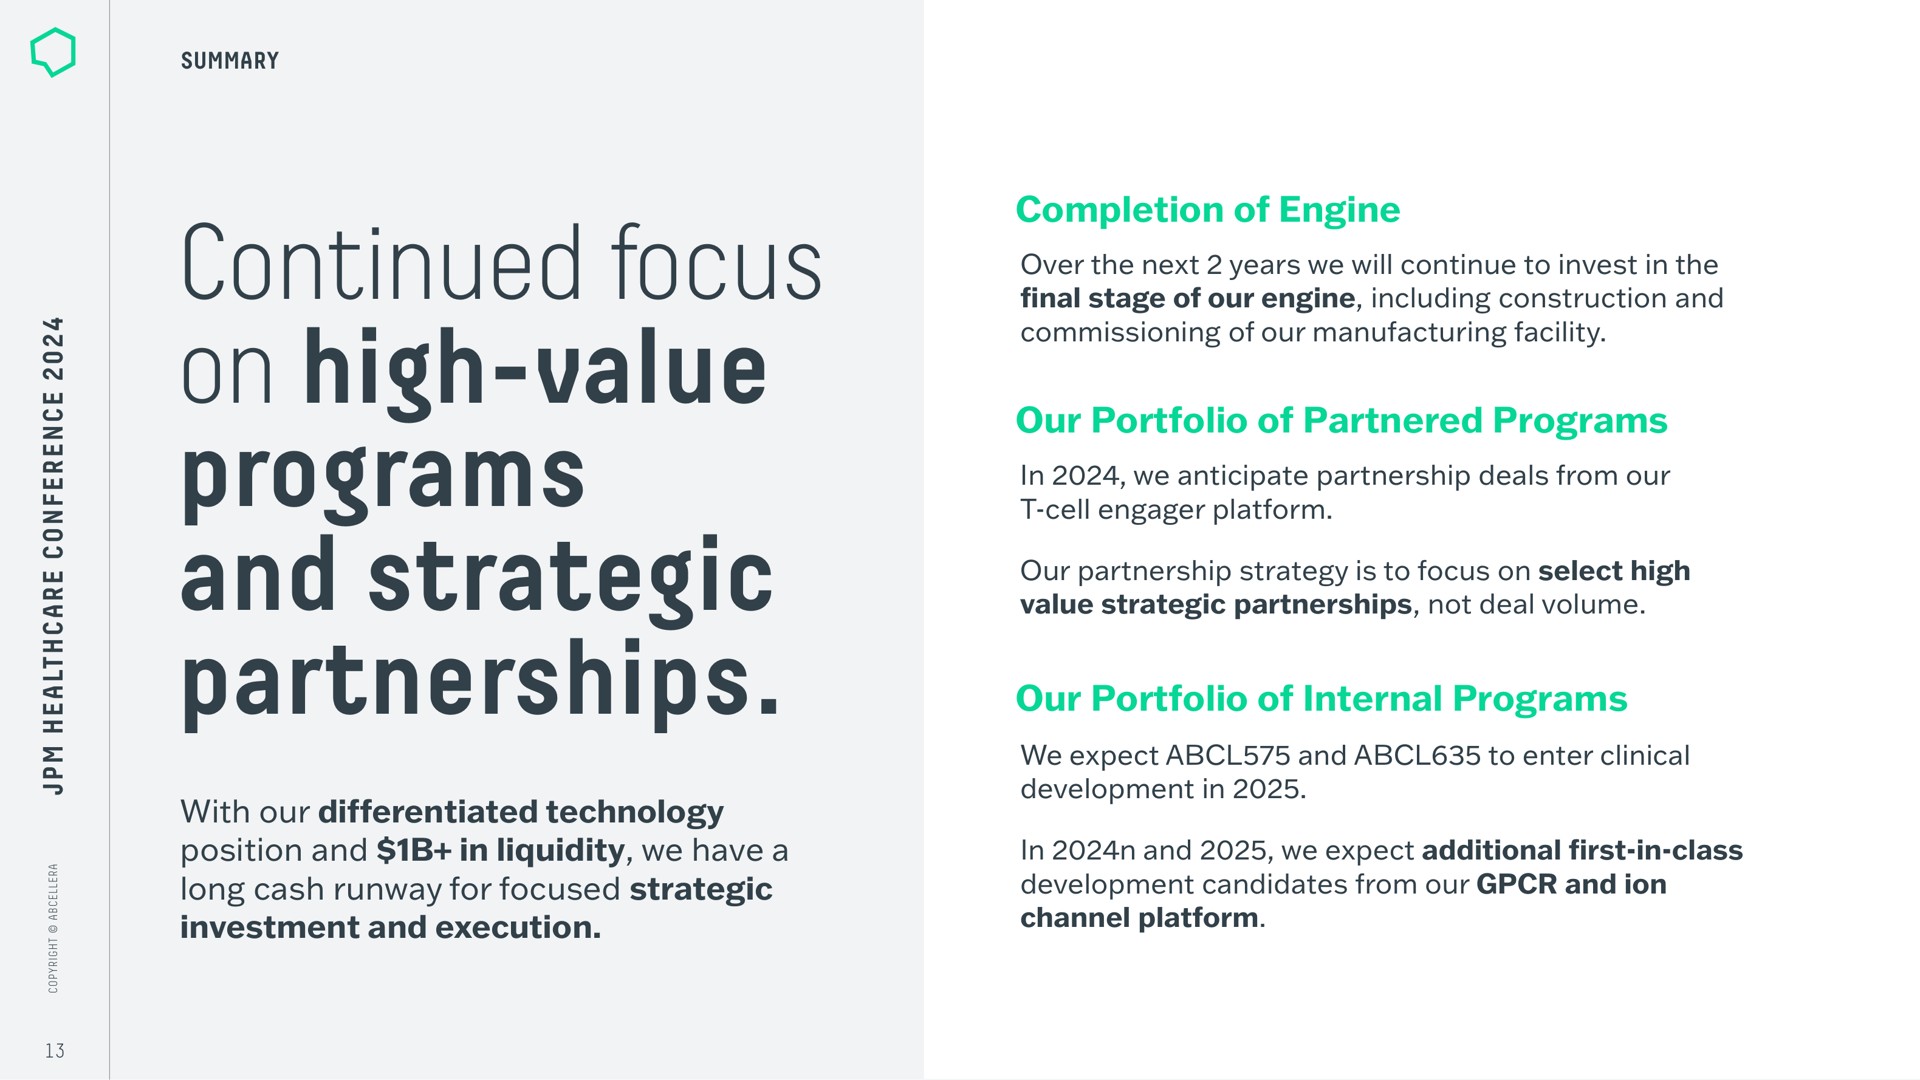 continued focus on high value programs and strategic partnerships with our differentiated technology position in liquidity we have a long cash runway for focused investment execution completion of engine over the next years we will continue to invest in the final stage of our engine including construction commissioning of our manufacturing facility our portfolio of partnered in we anticipate partnership deals from our cell engager platform our partnership strategy is to select high value not deal volume our portfolio of internal we expect to enter clinical development in in we expect additional first in class development candidates from our ion channel platform | AbCellera